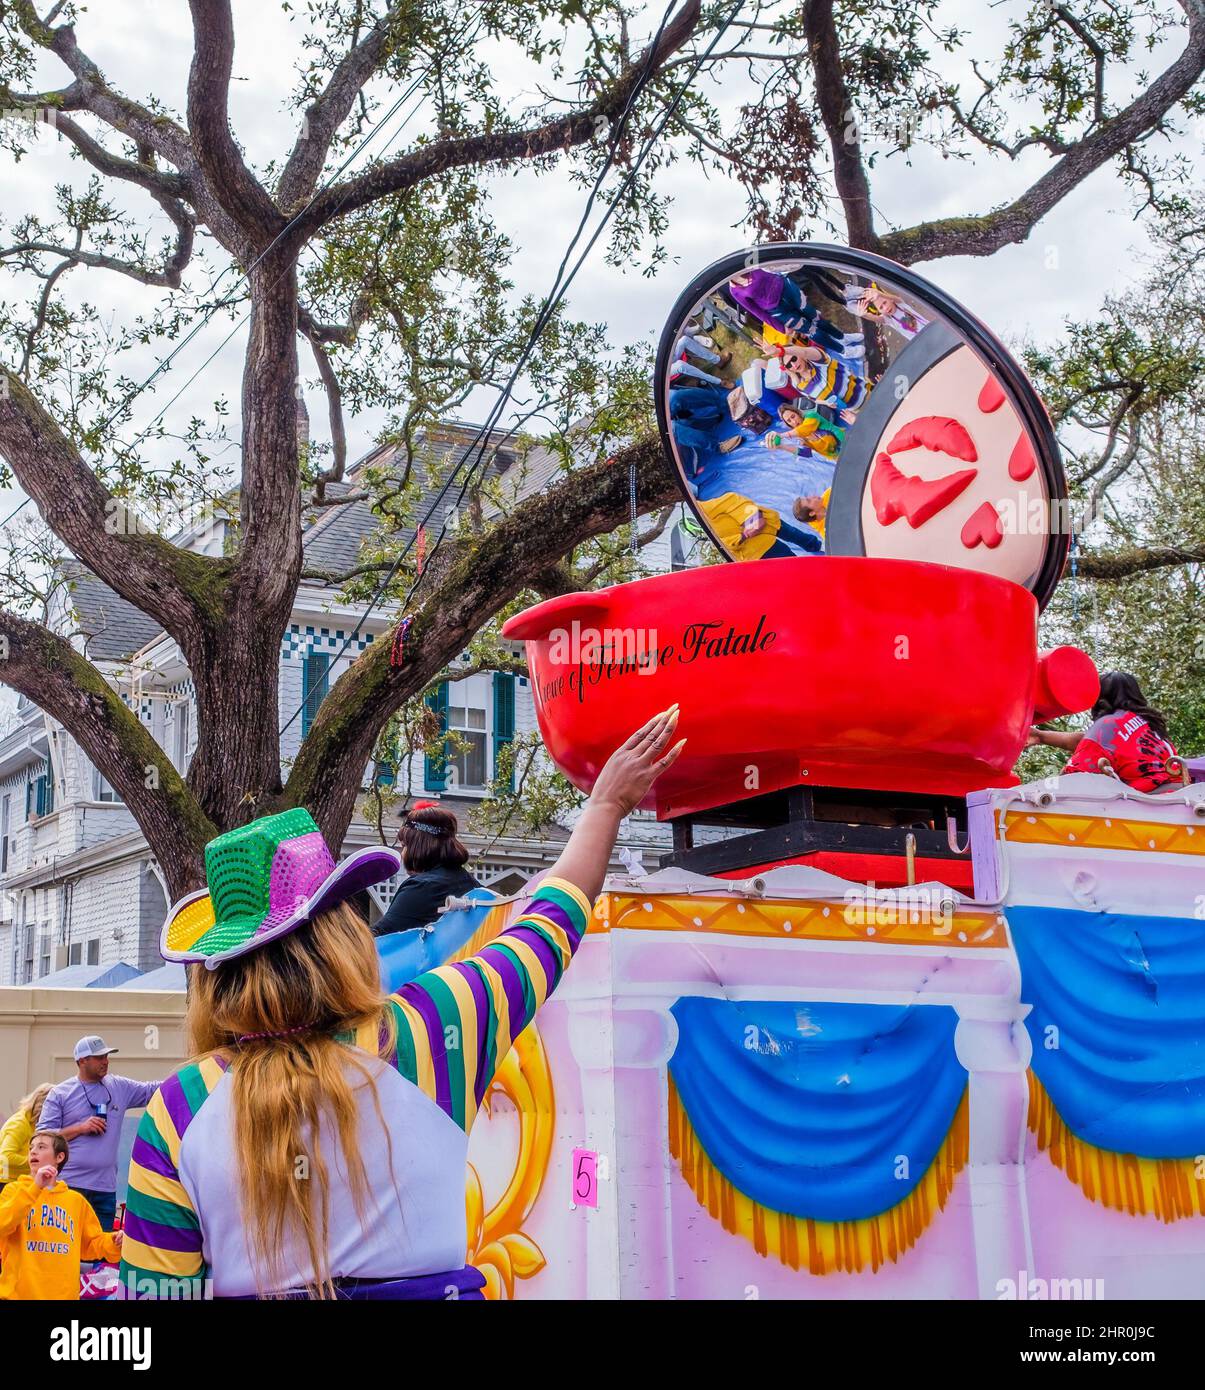 NEW ORLEANS, LA, USA - FEBRUARY 20, 2022: Woman in Mardi Gras apparel with outstretched arm soliciting beads from float riders of Femme Fatale Parade Stock Photo